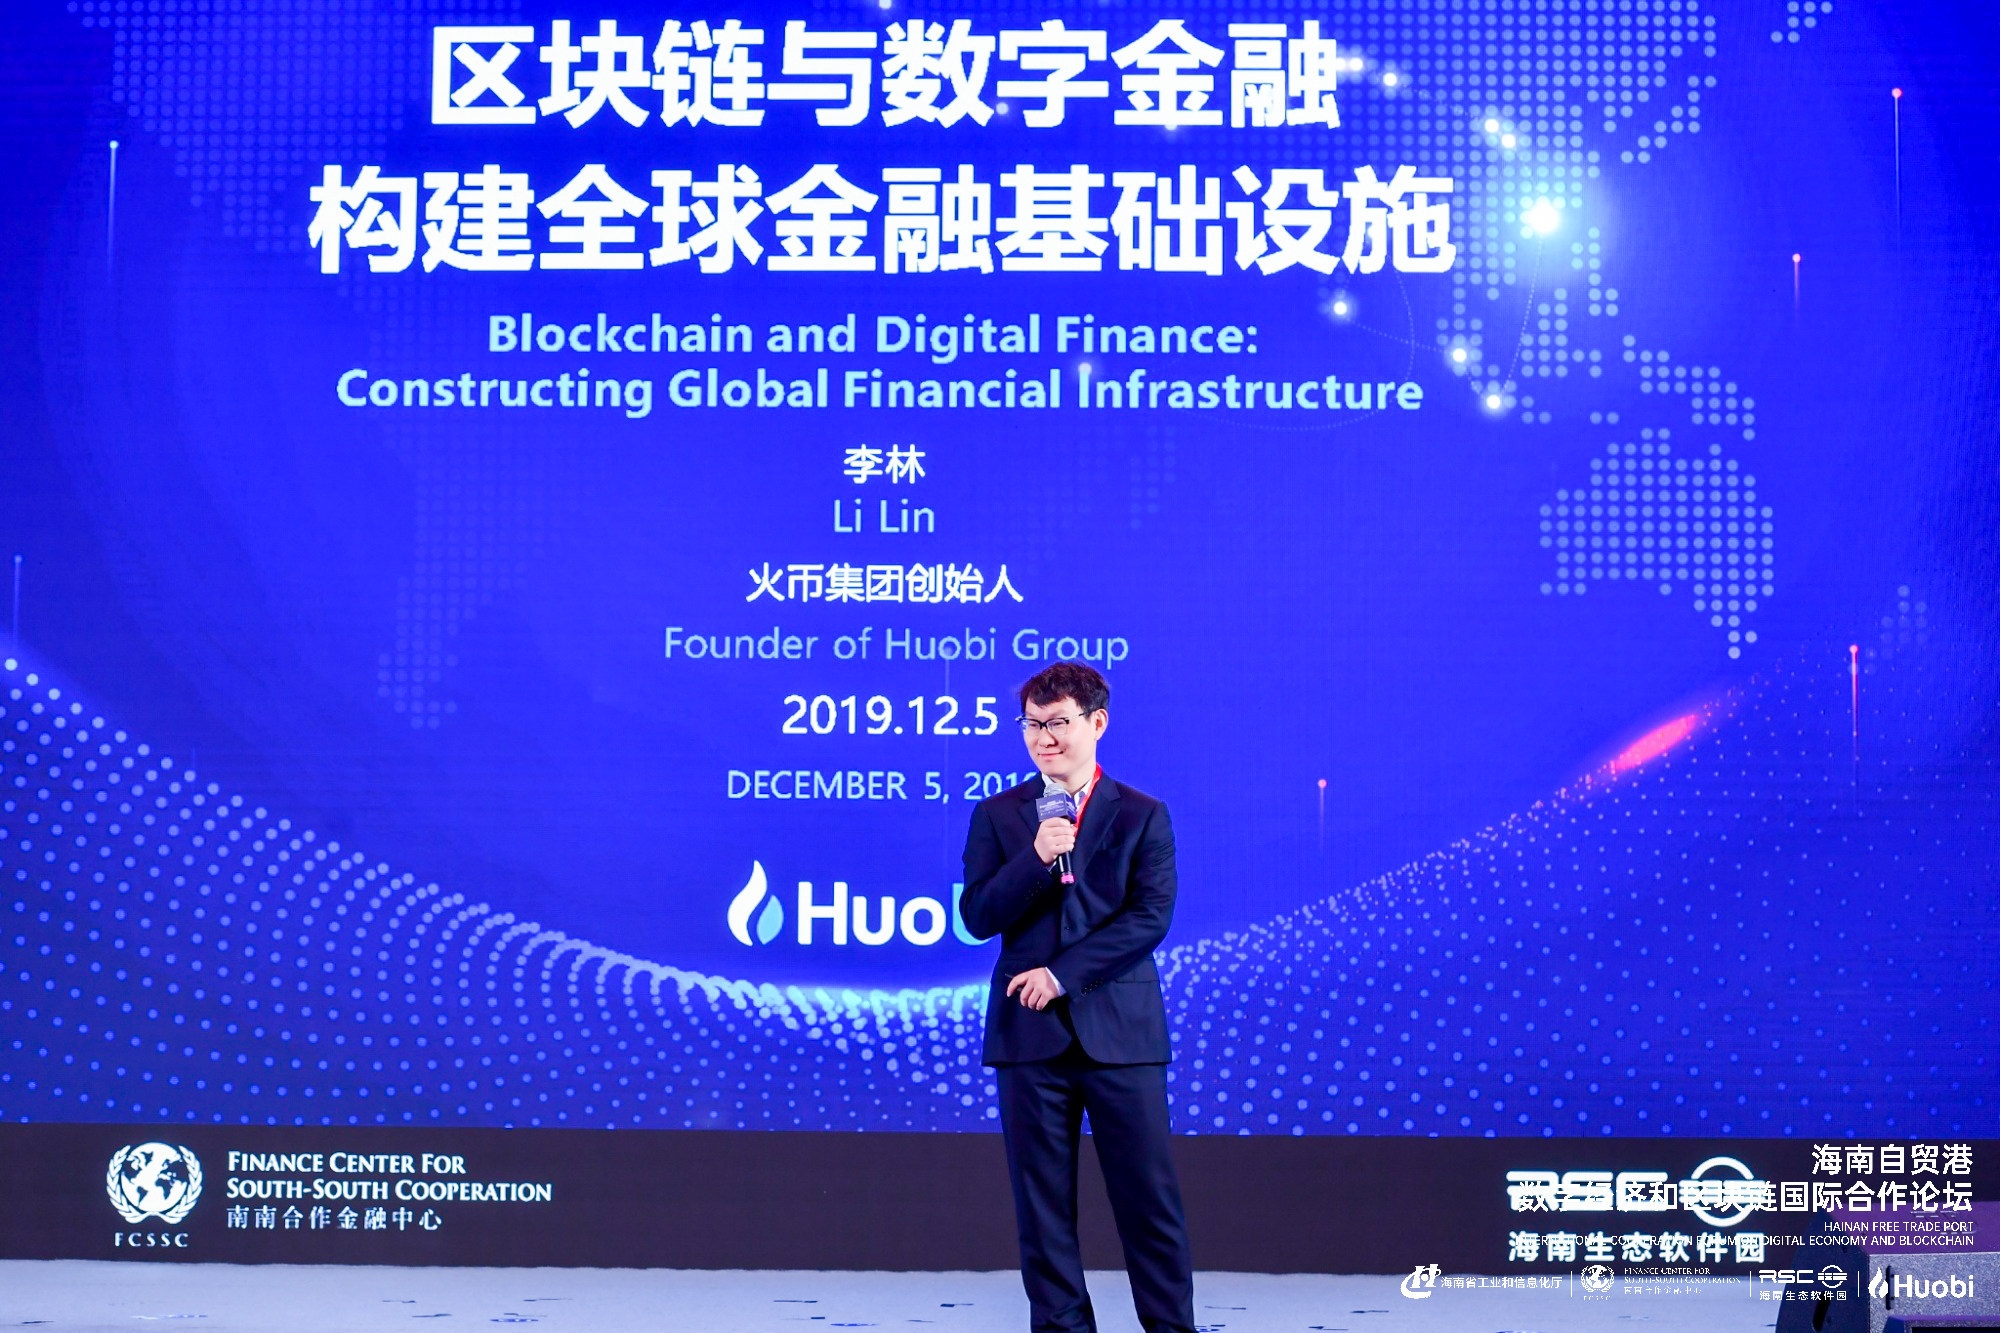 Huobi Releases Details from the Hainan Free Trade Port ...